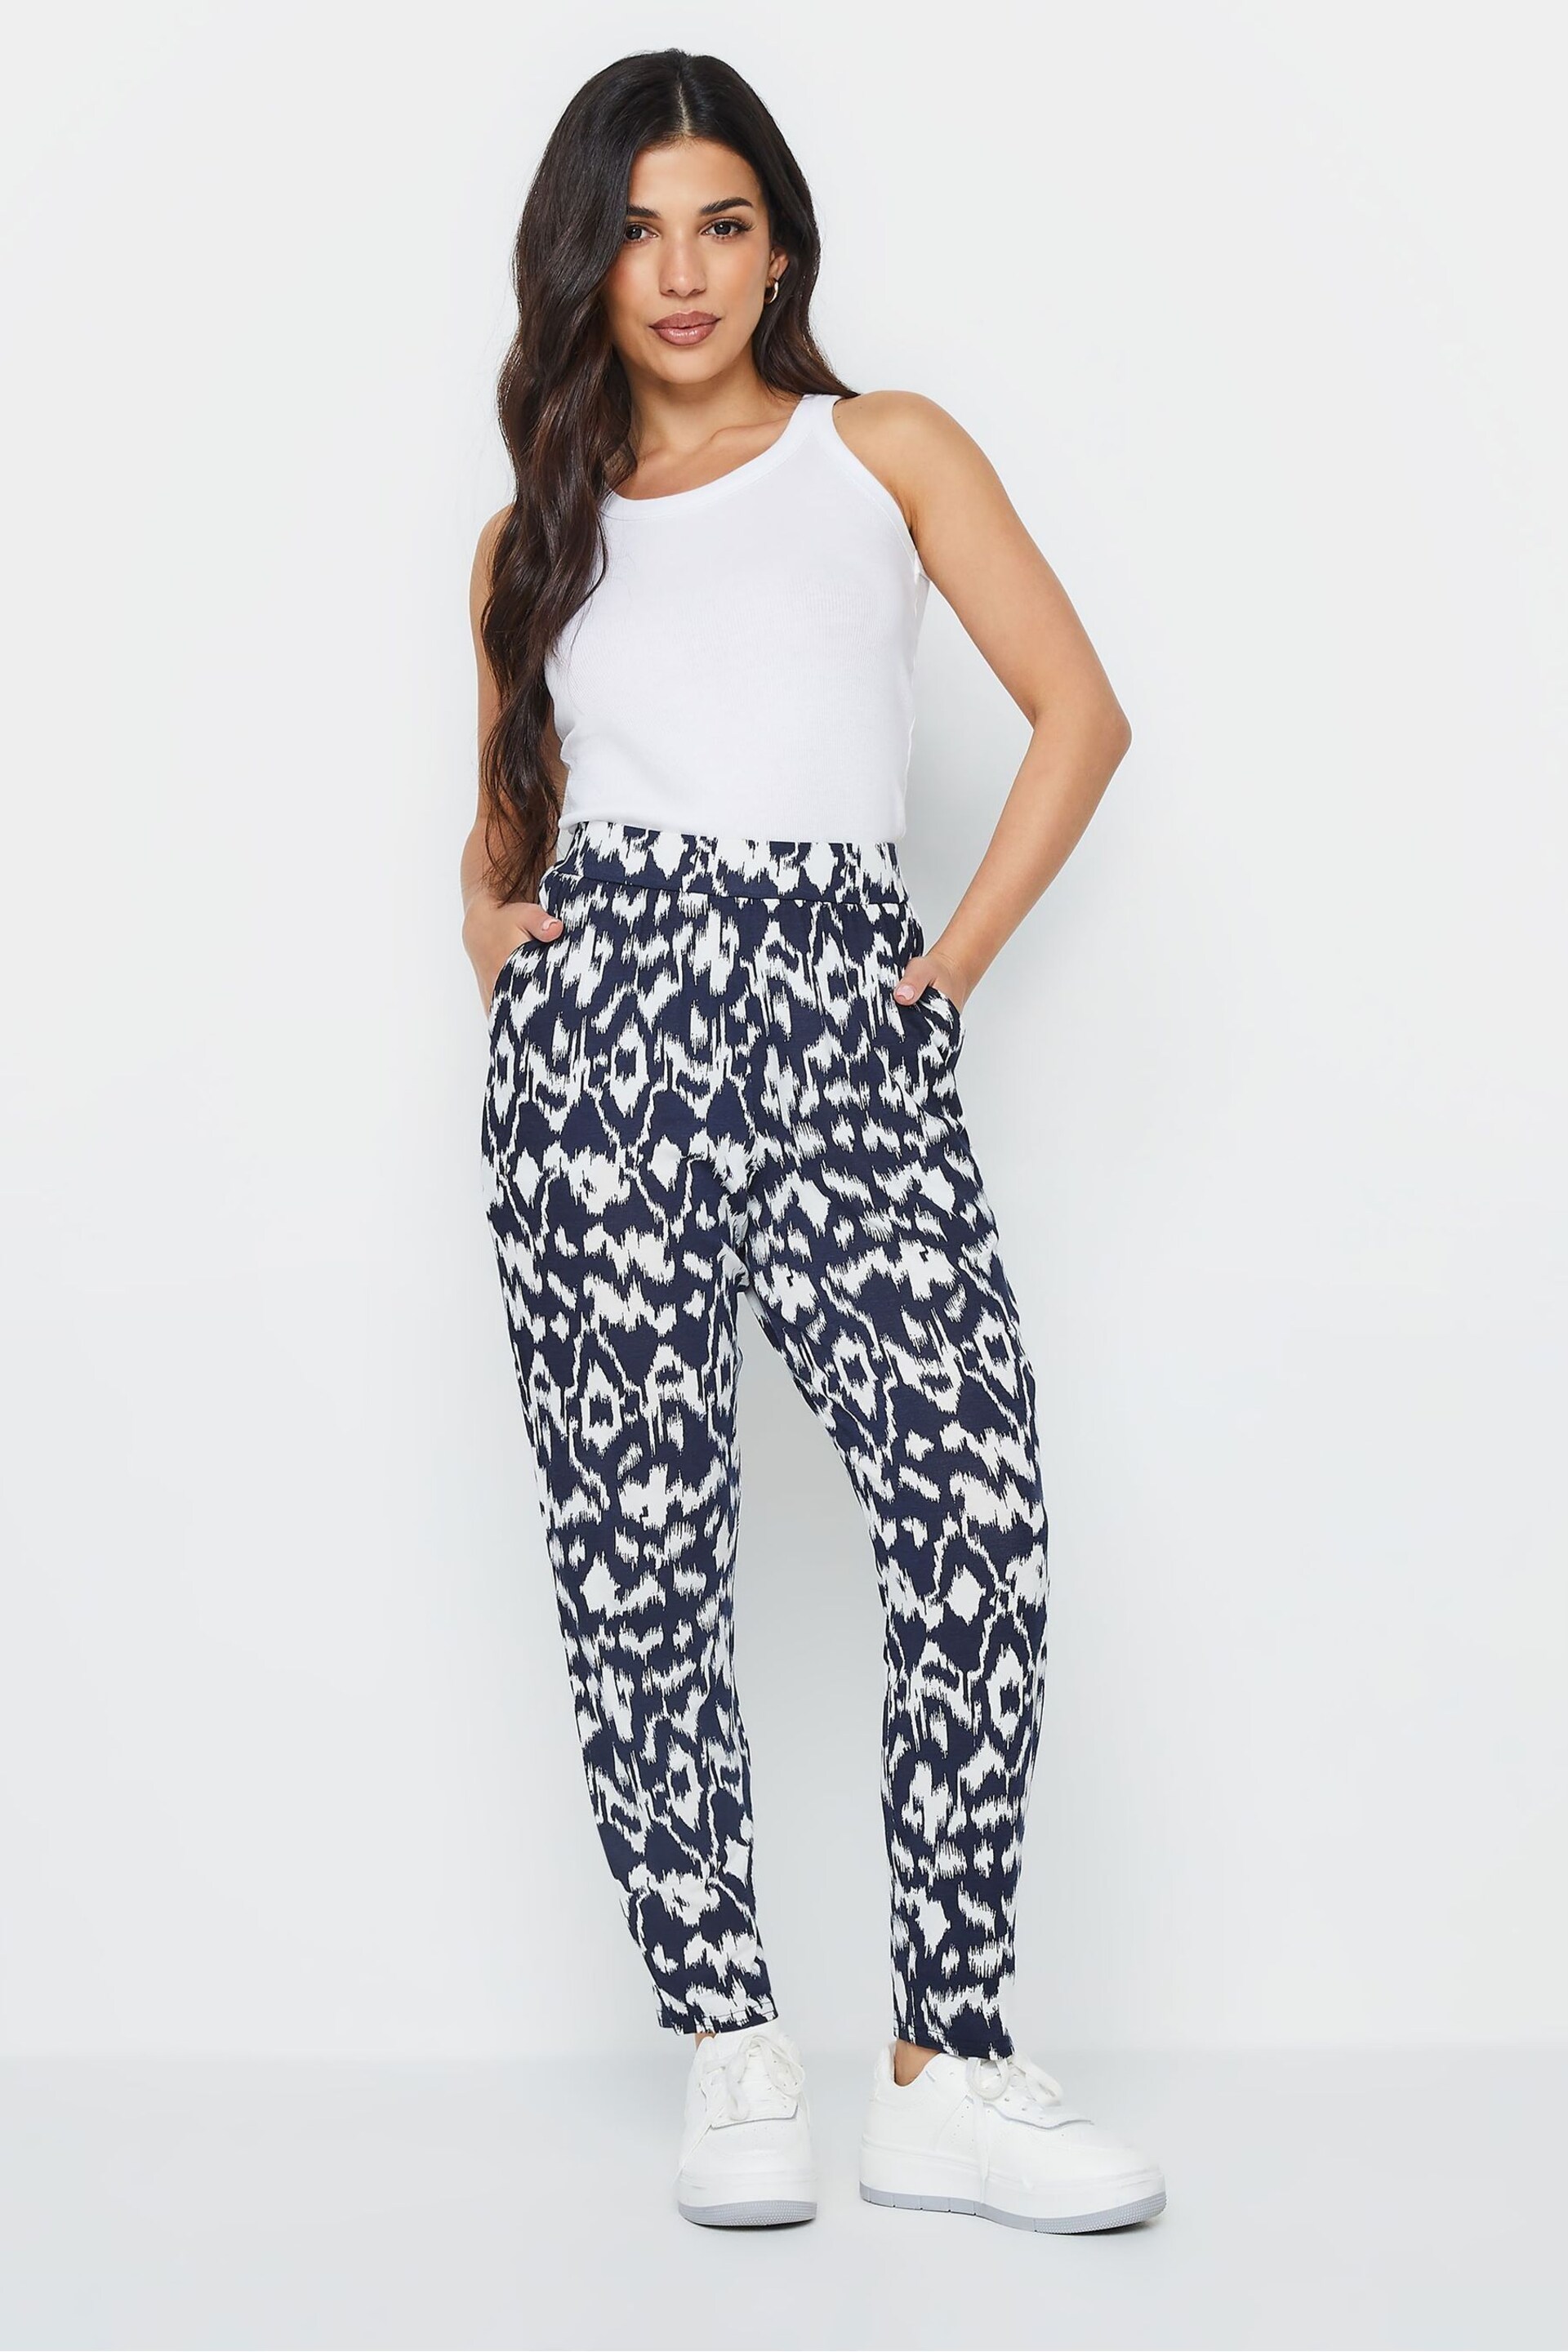 PixieGirl Petite Blue Abstract Harem Trousers - Image 4 of 5